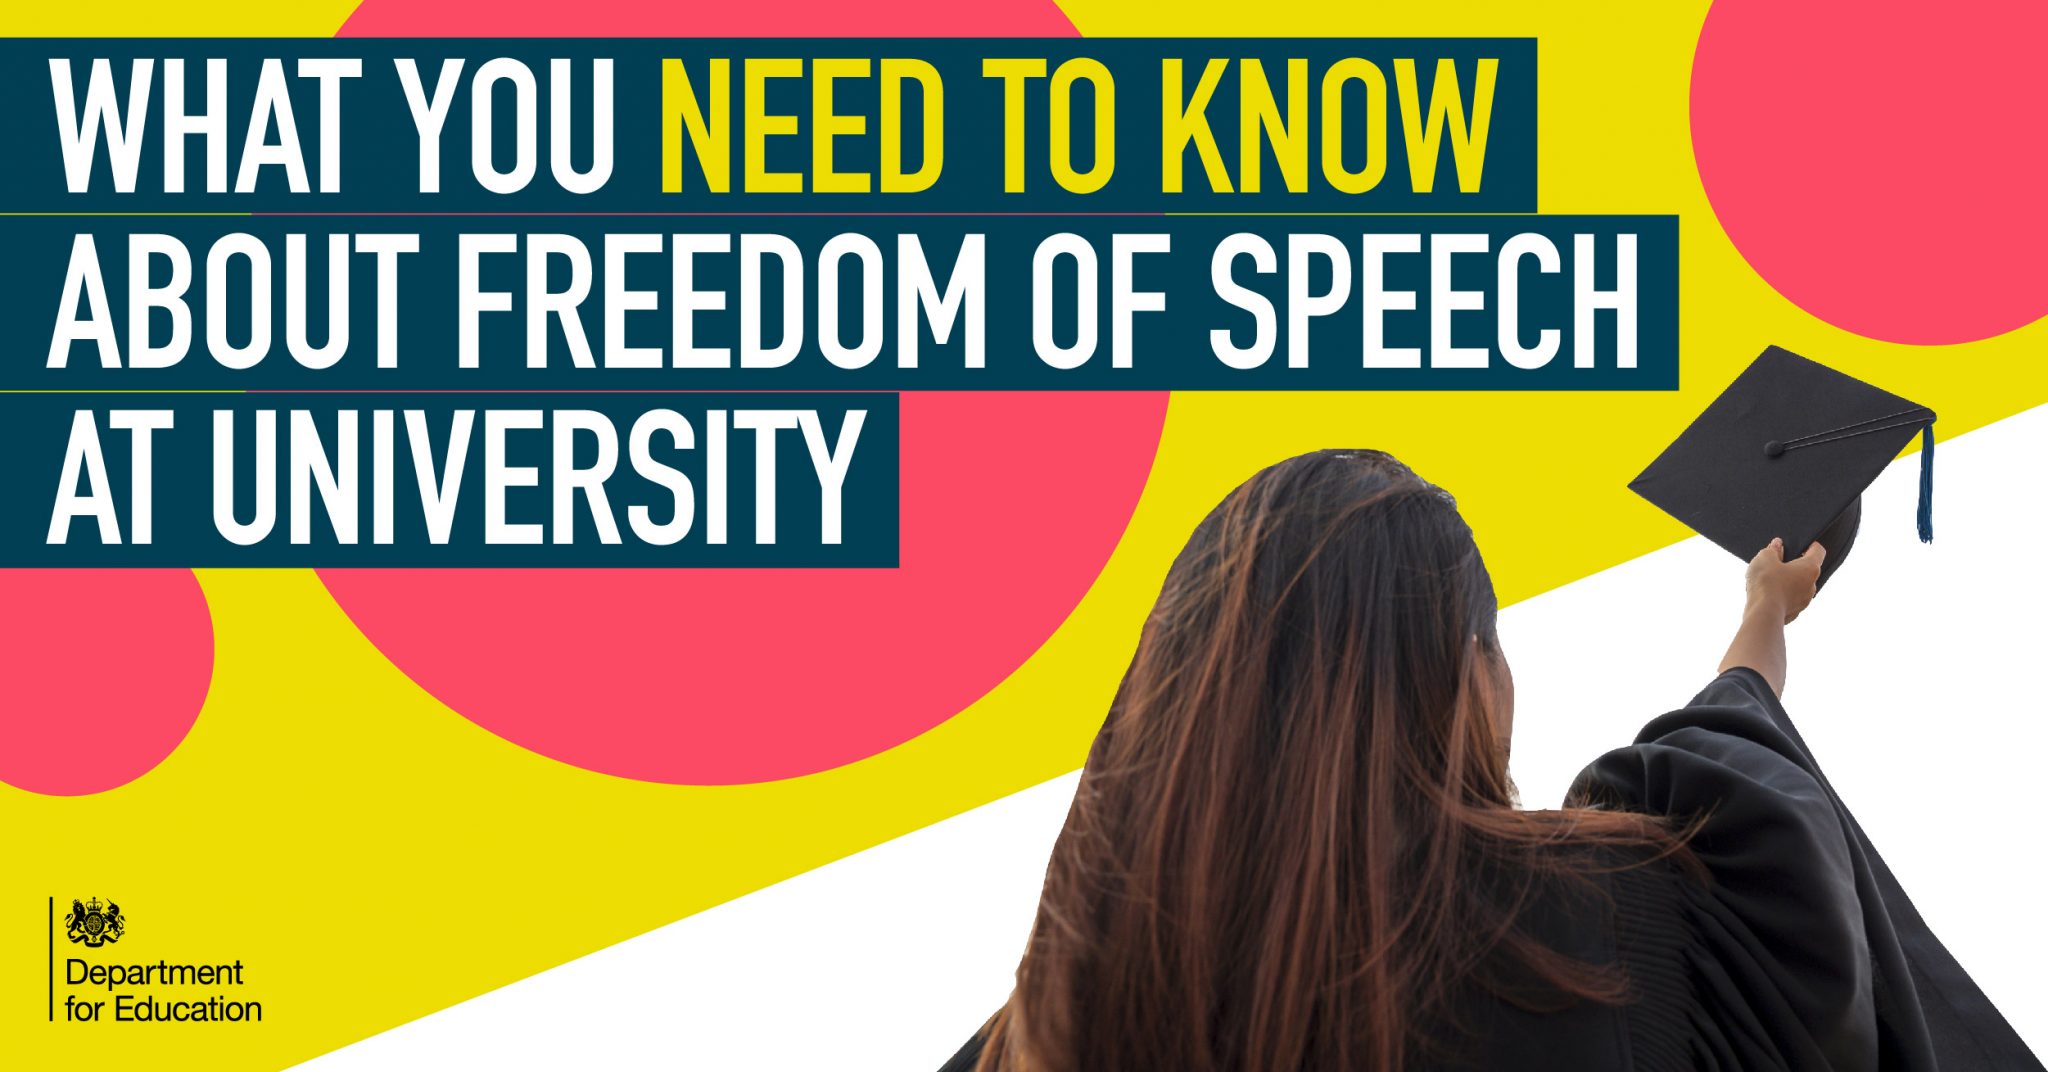 What you need to know about freedom of speech at university and why